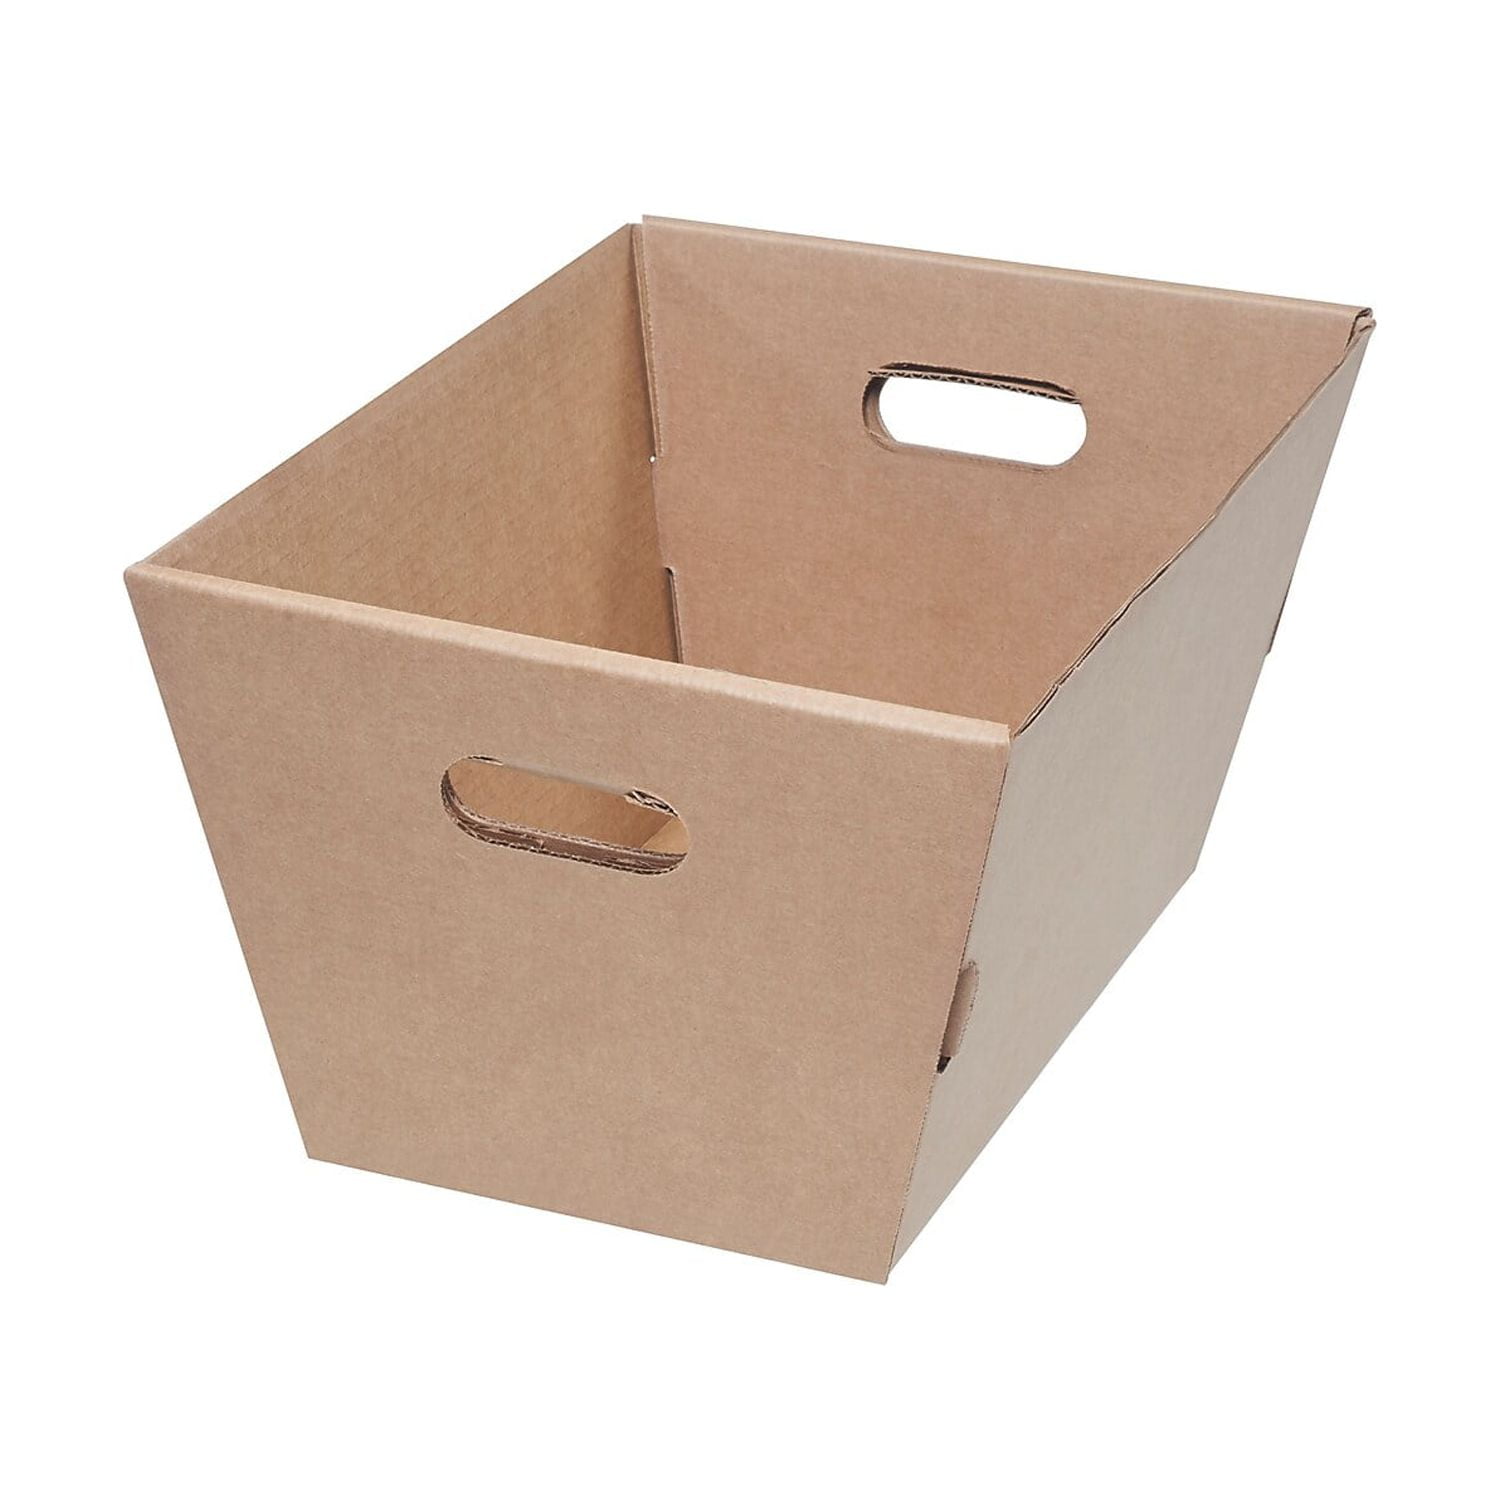 Picture of Box Partners MT191310 19.5 x 13 x 10 in. Corrugated Tote - Pack of 25